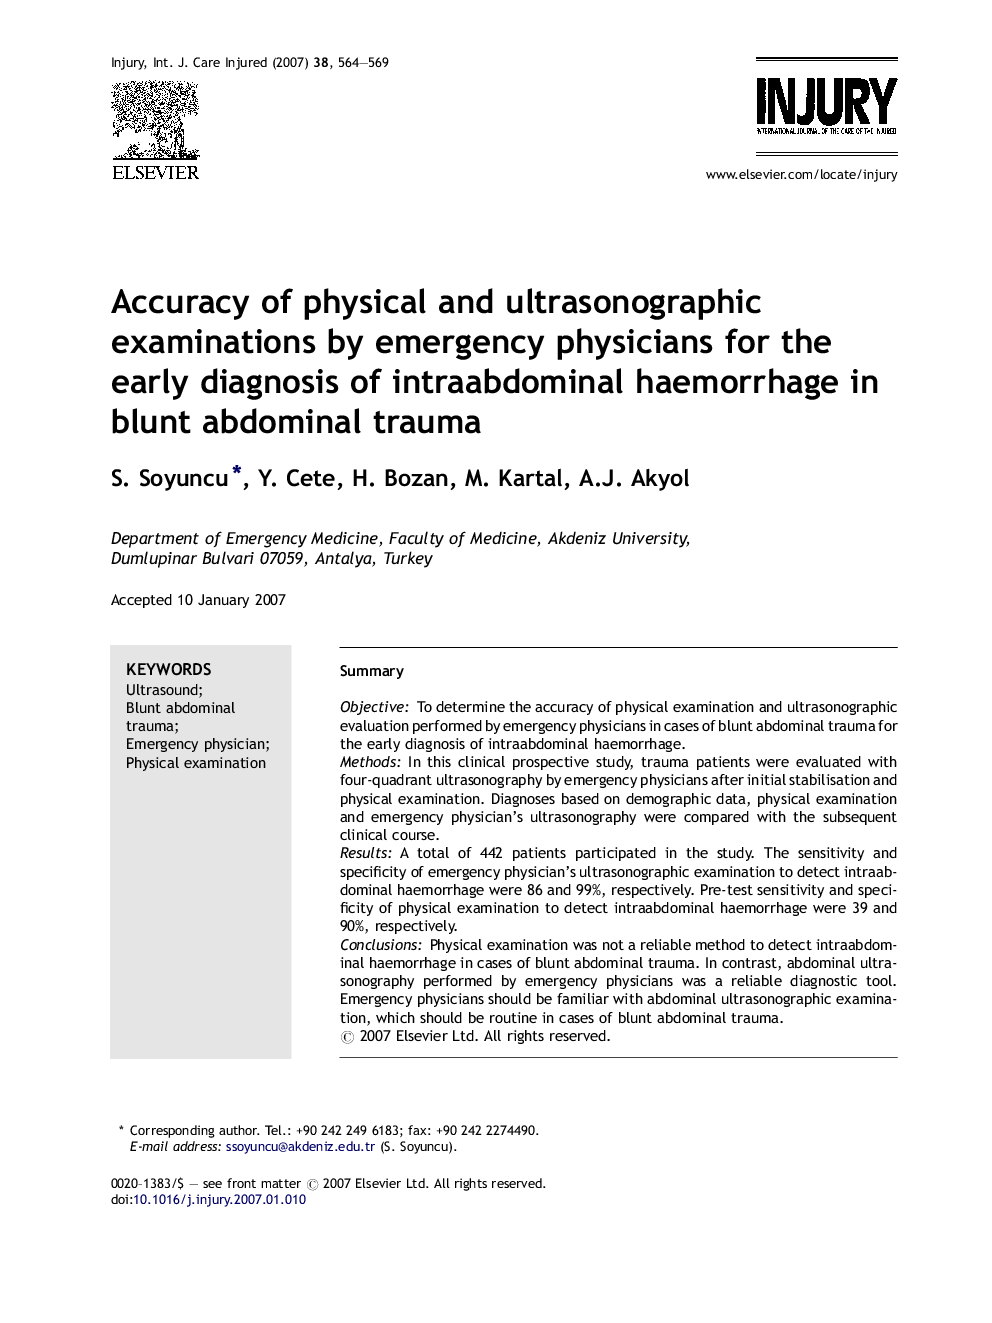 Accuracy of physical and ultrasonographic examinations by emergency physicians for the early diagnosis of intraabdominal haemorrhage in blunt abdominal trauma